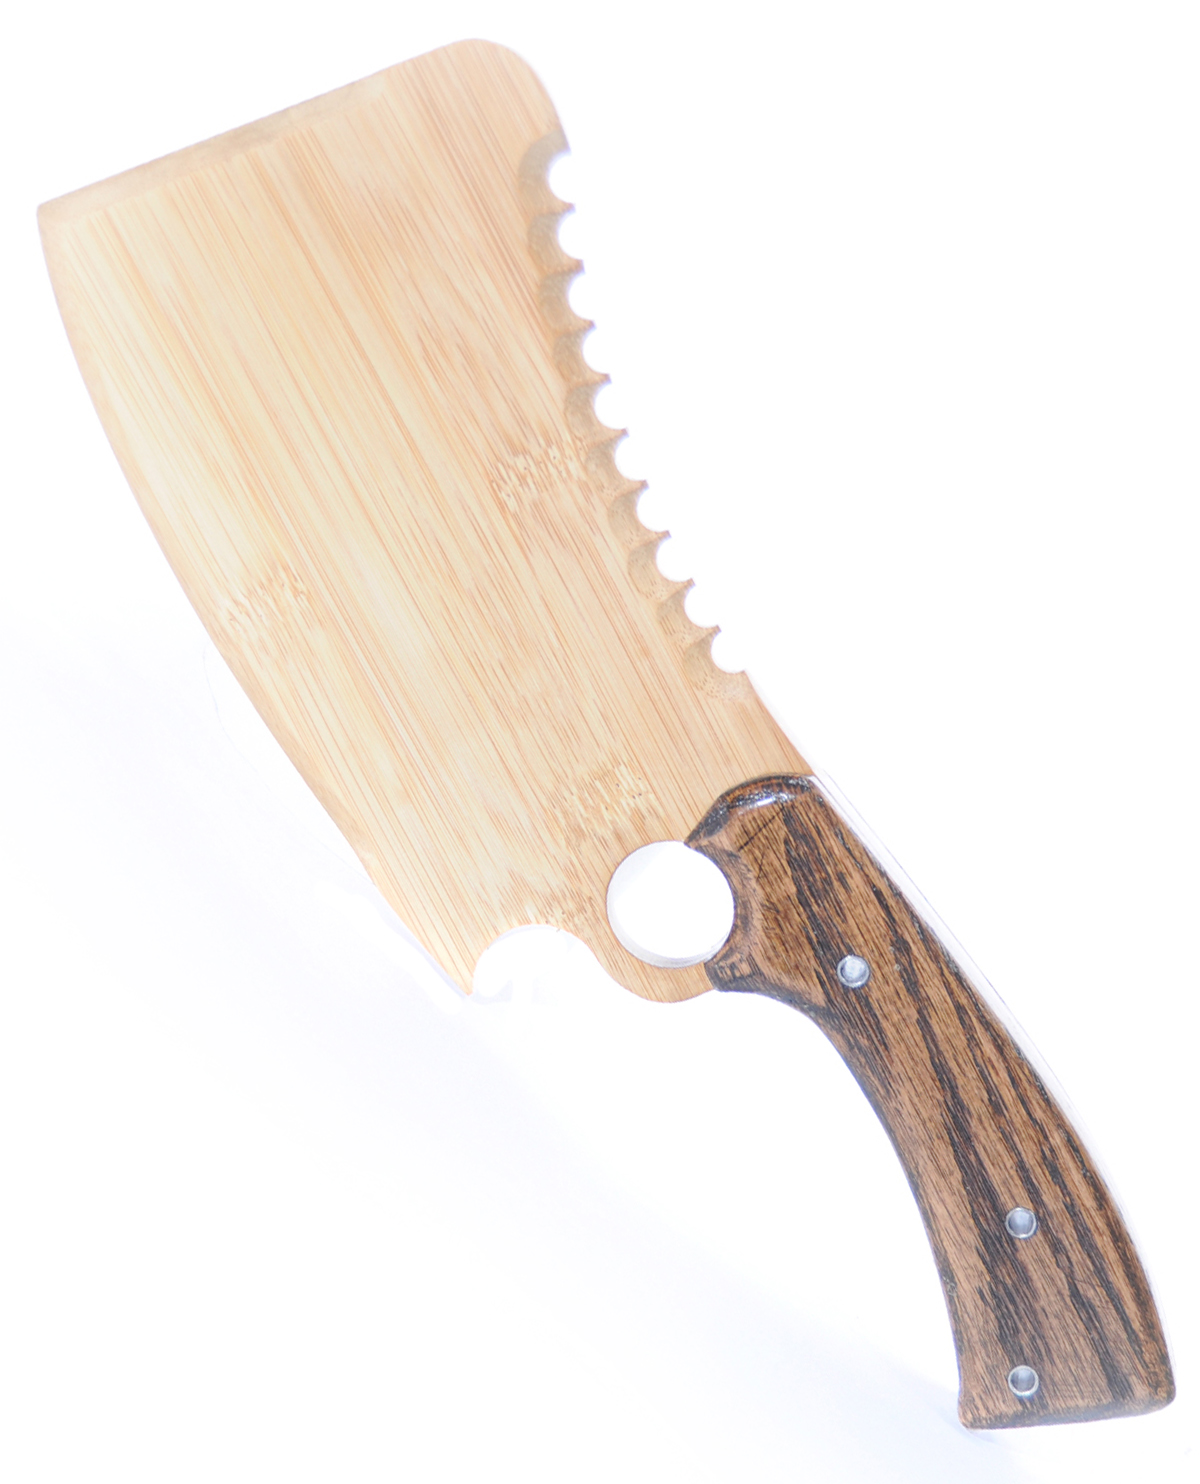 CLEAVER PADDLE